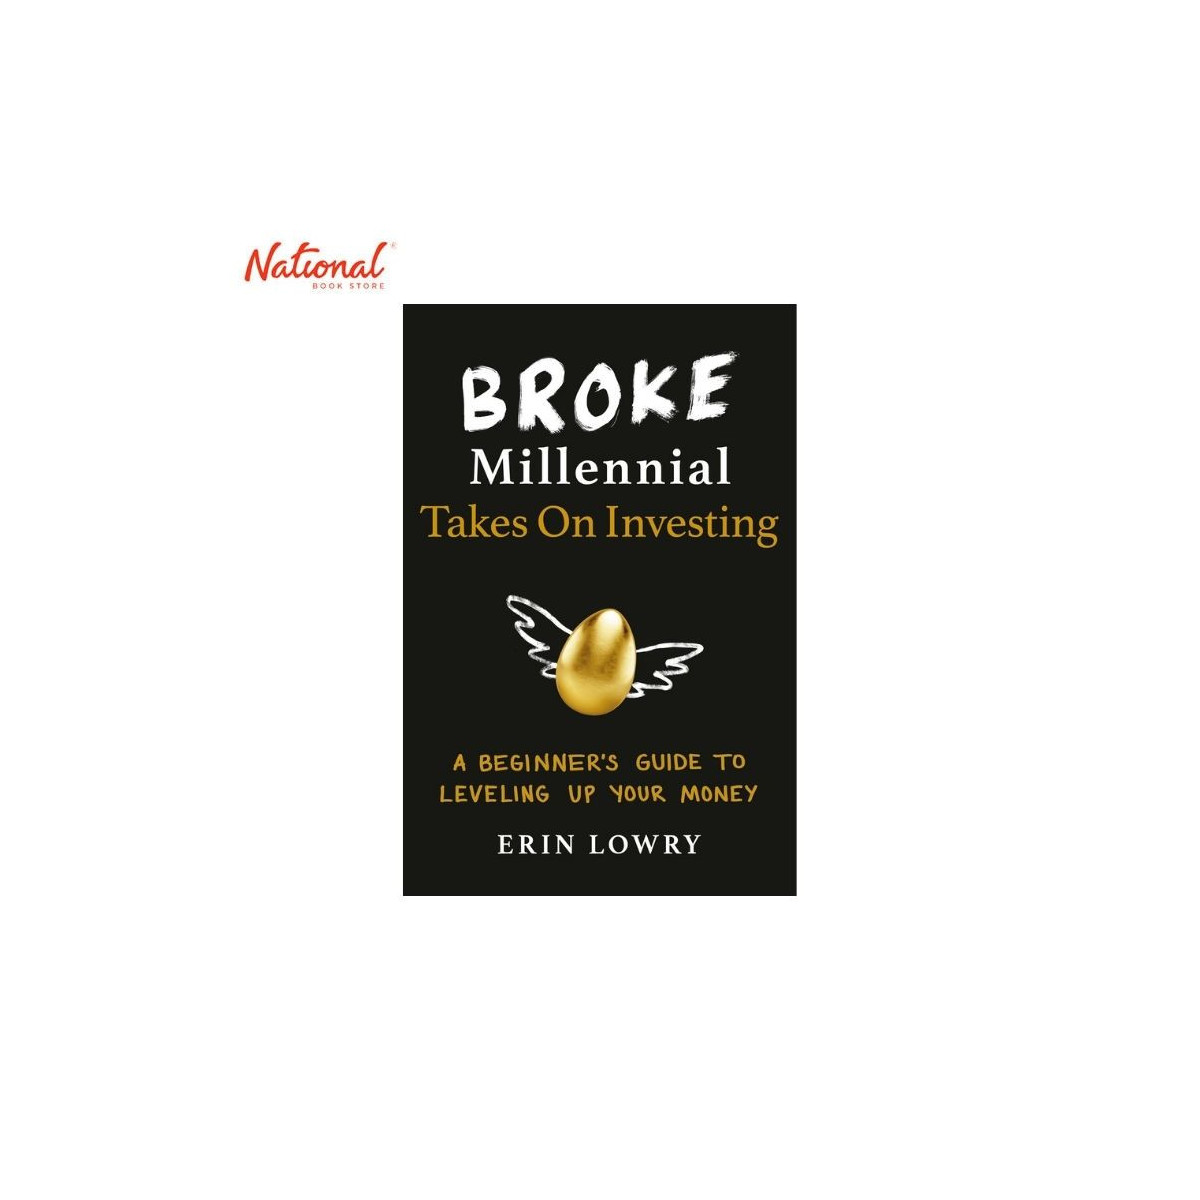 Broke Millennial Takes On Investing Trade Paperback by Erin Lowry